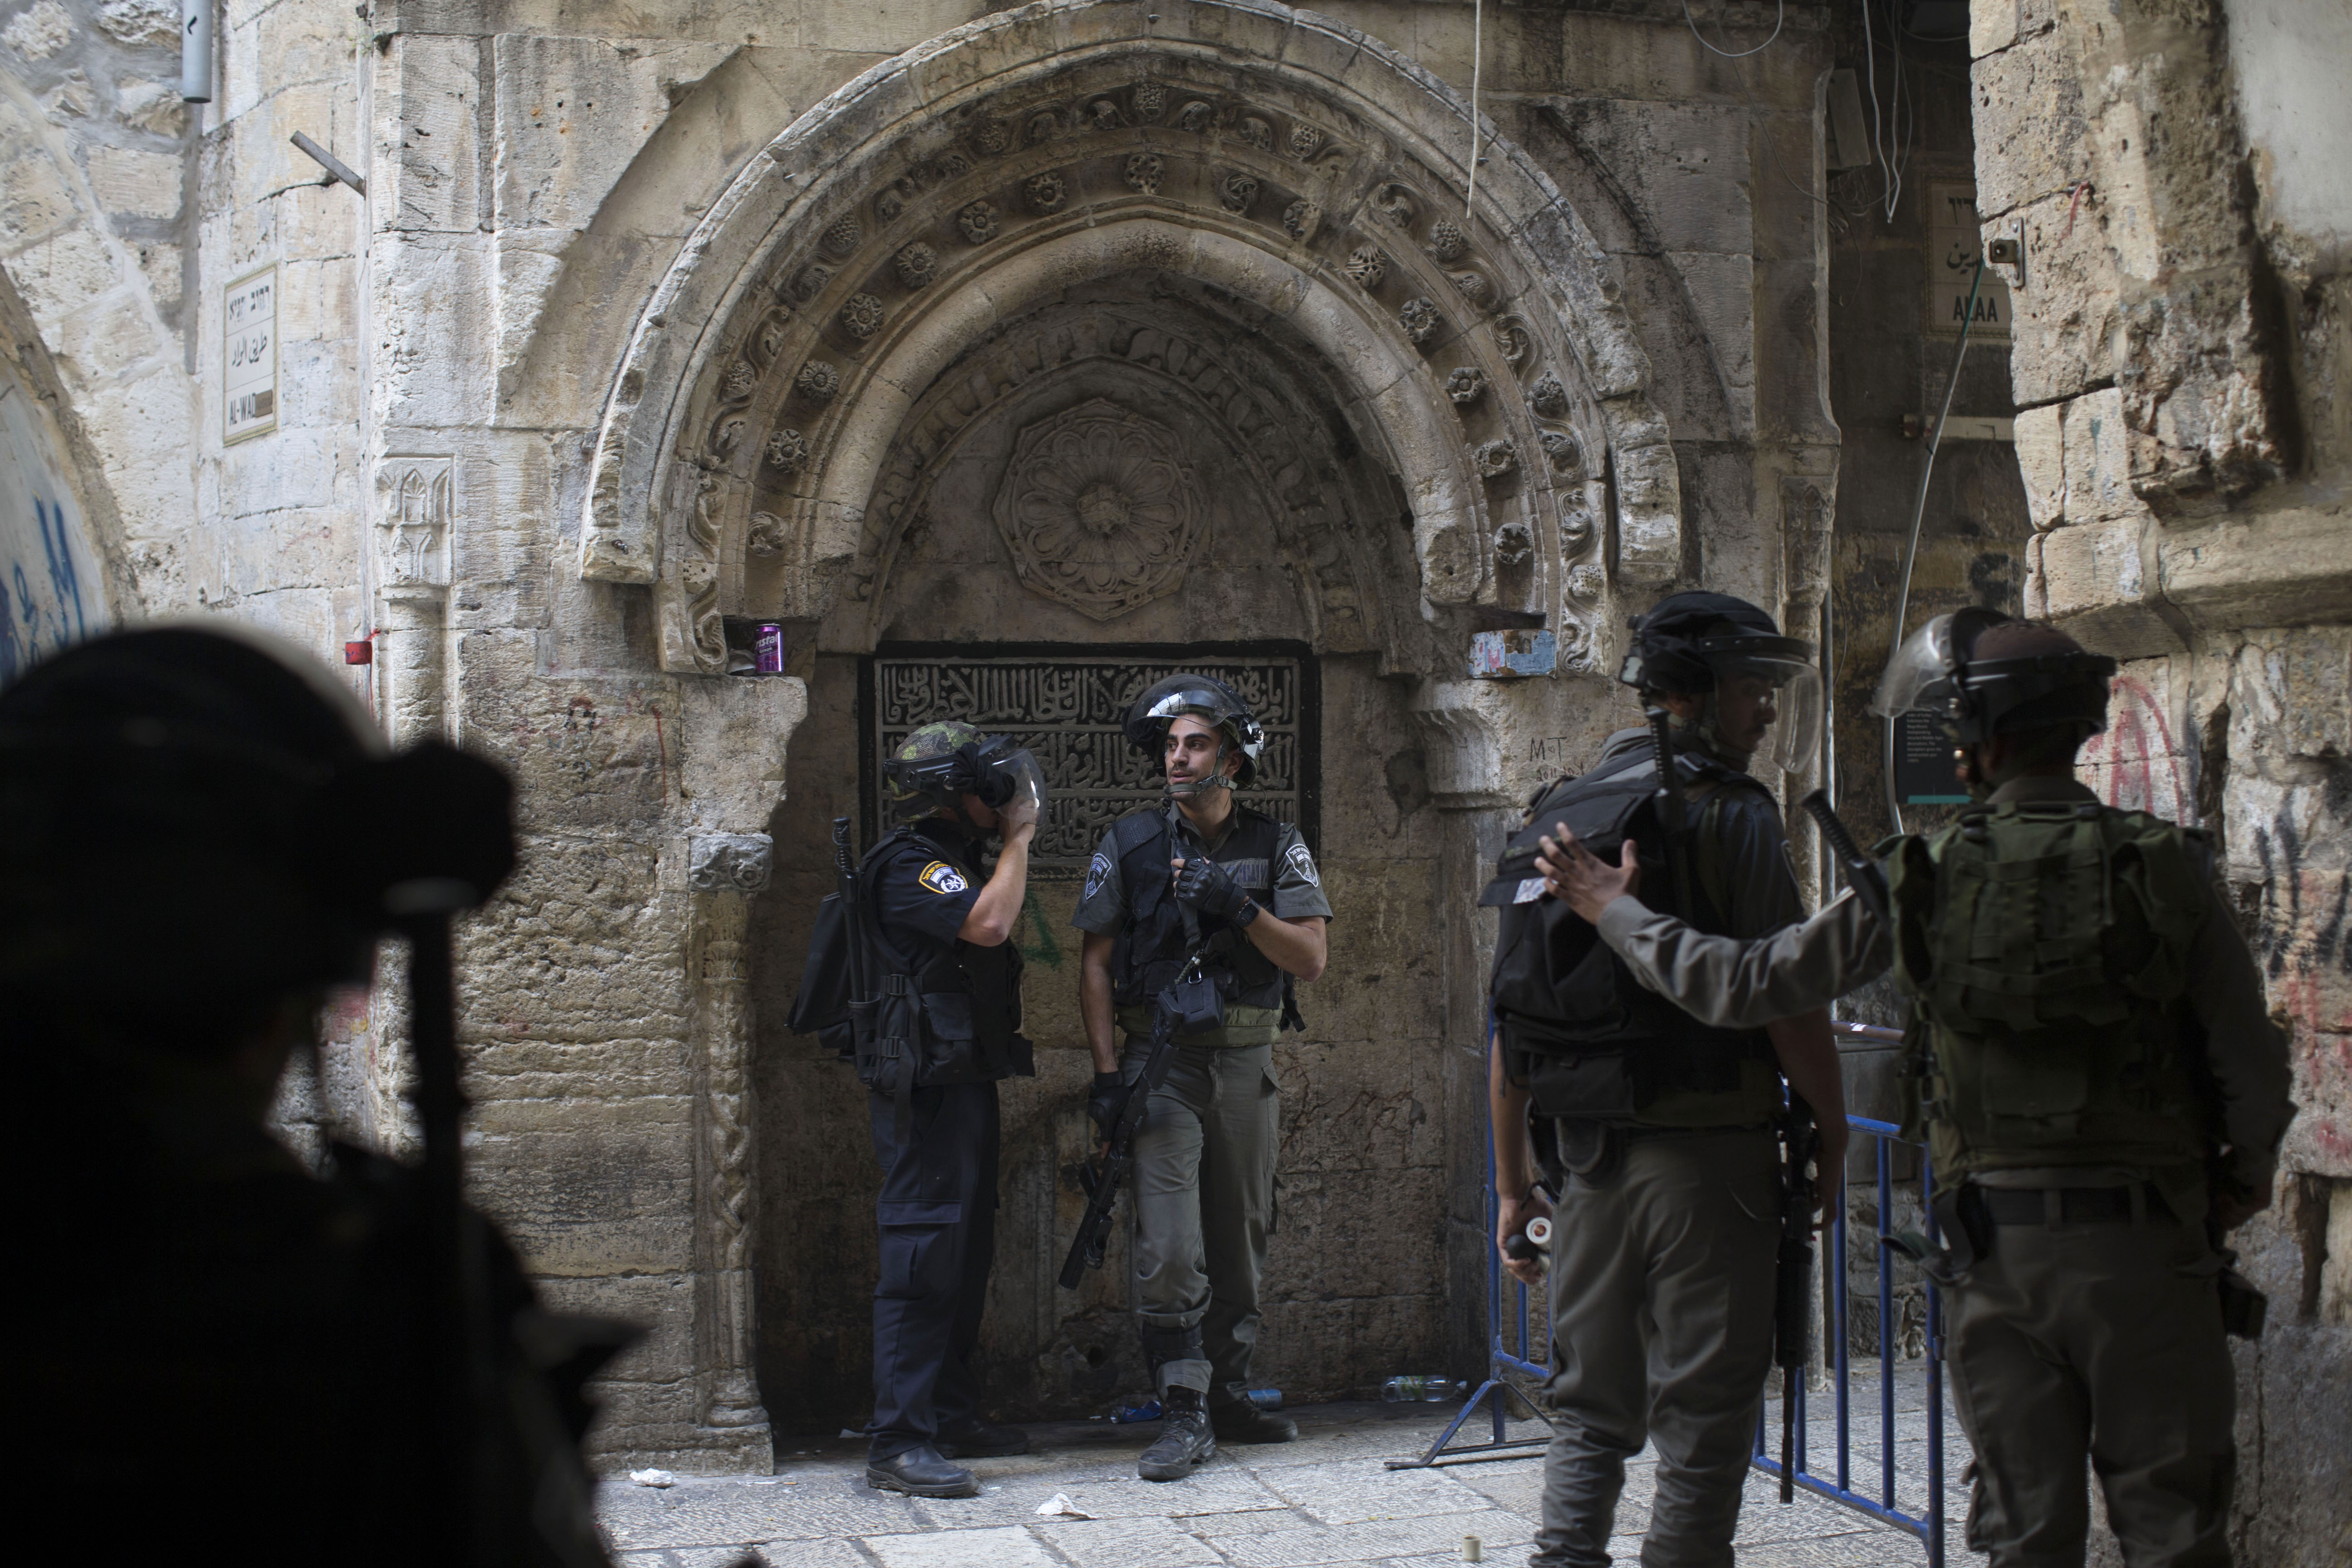 Israeli border police officers stand during clashes with Palestinian protesters in Jerusalem's old city, Tuesday, Sept. 15, 2015, in a third straight day of unrest at Jerusalem's most sensitive holy site. (AP Photo)